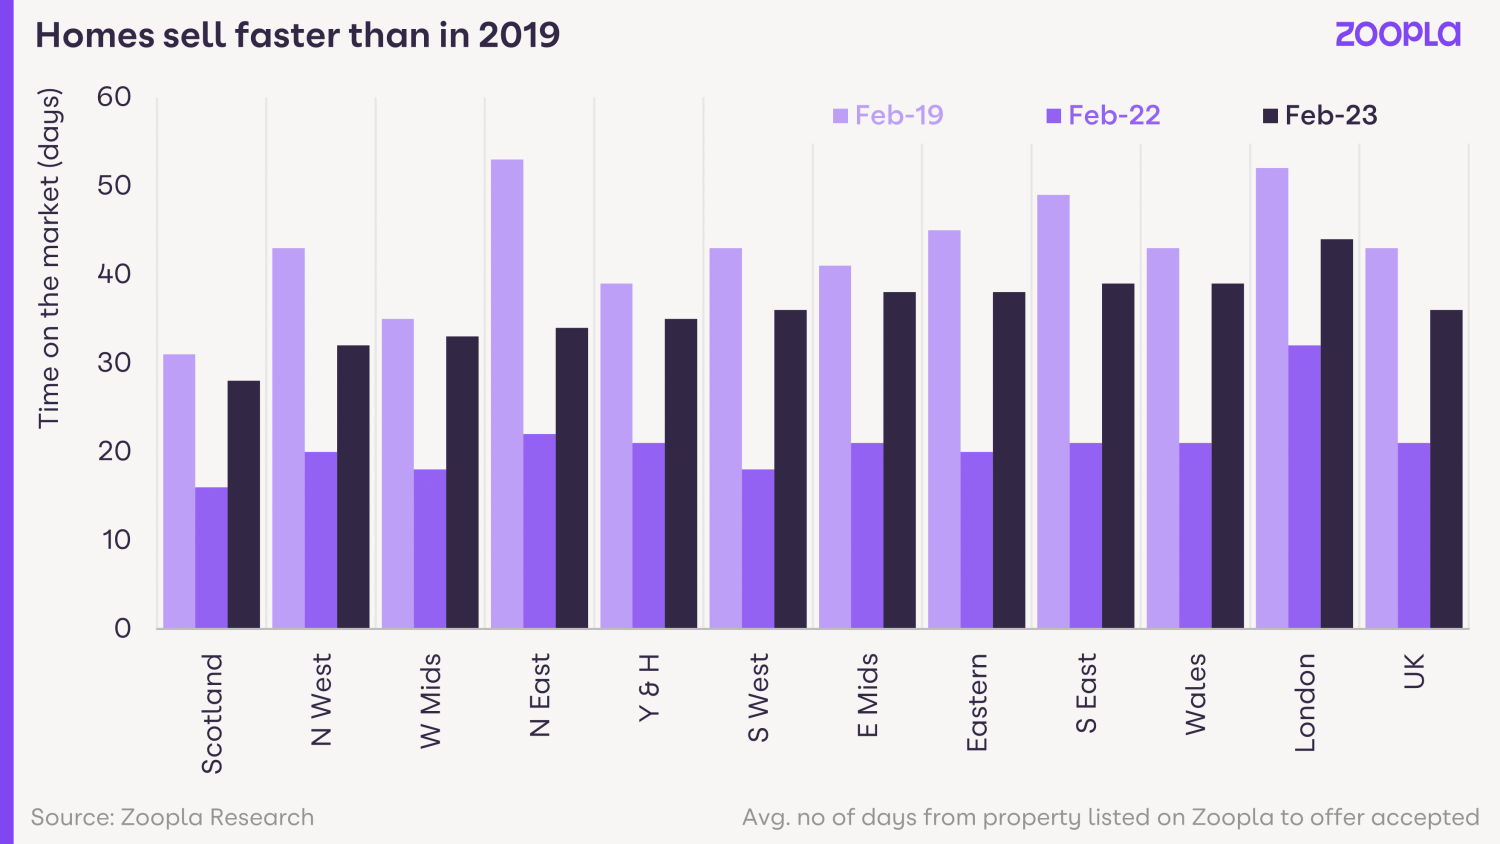 A chart showing that homes are selling faster than in 2019 in all regions, although still slower than in February 2022